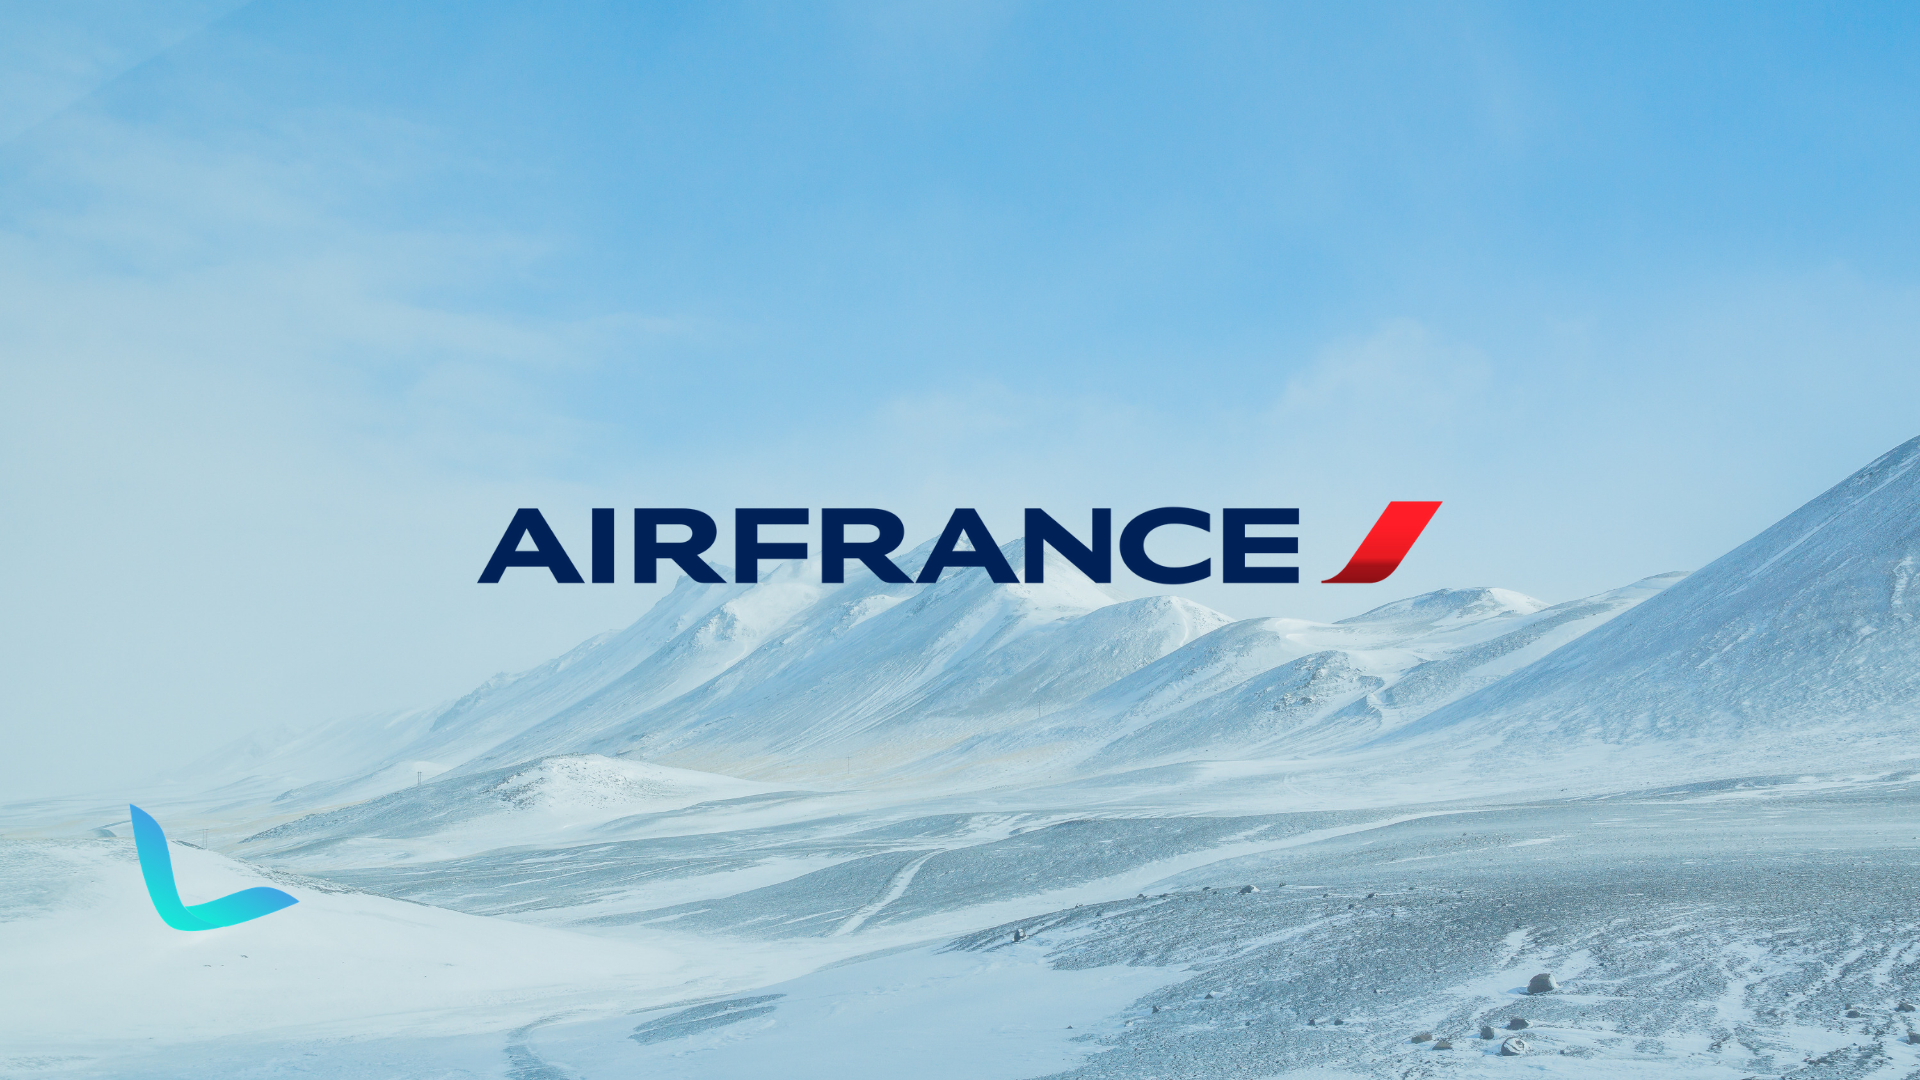 Air France AVIATION, Hotels & Lounges